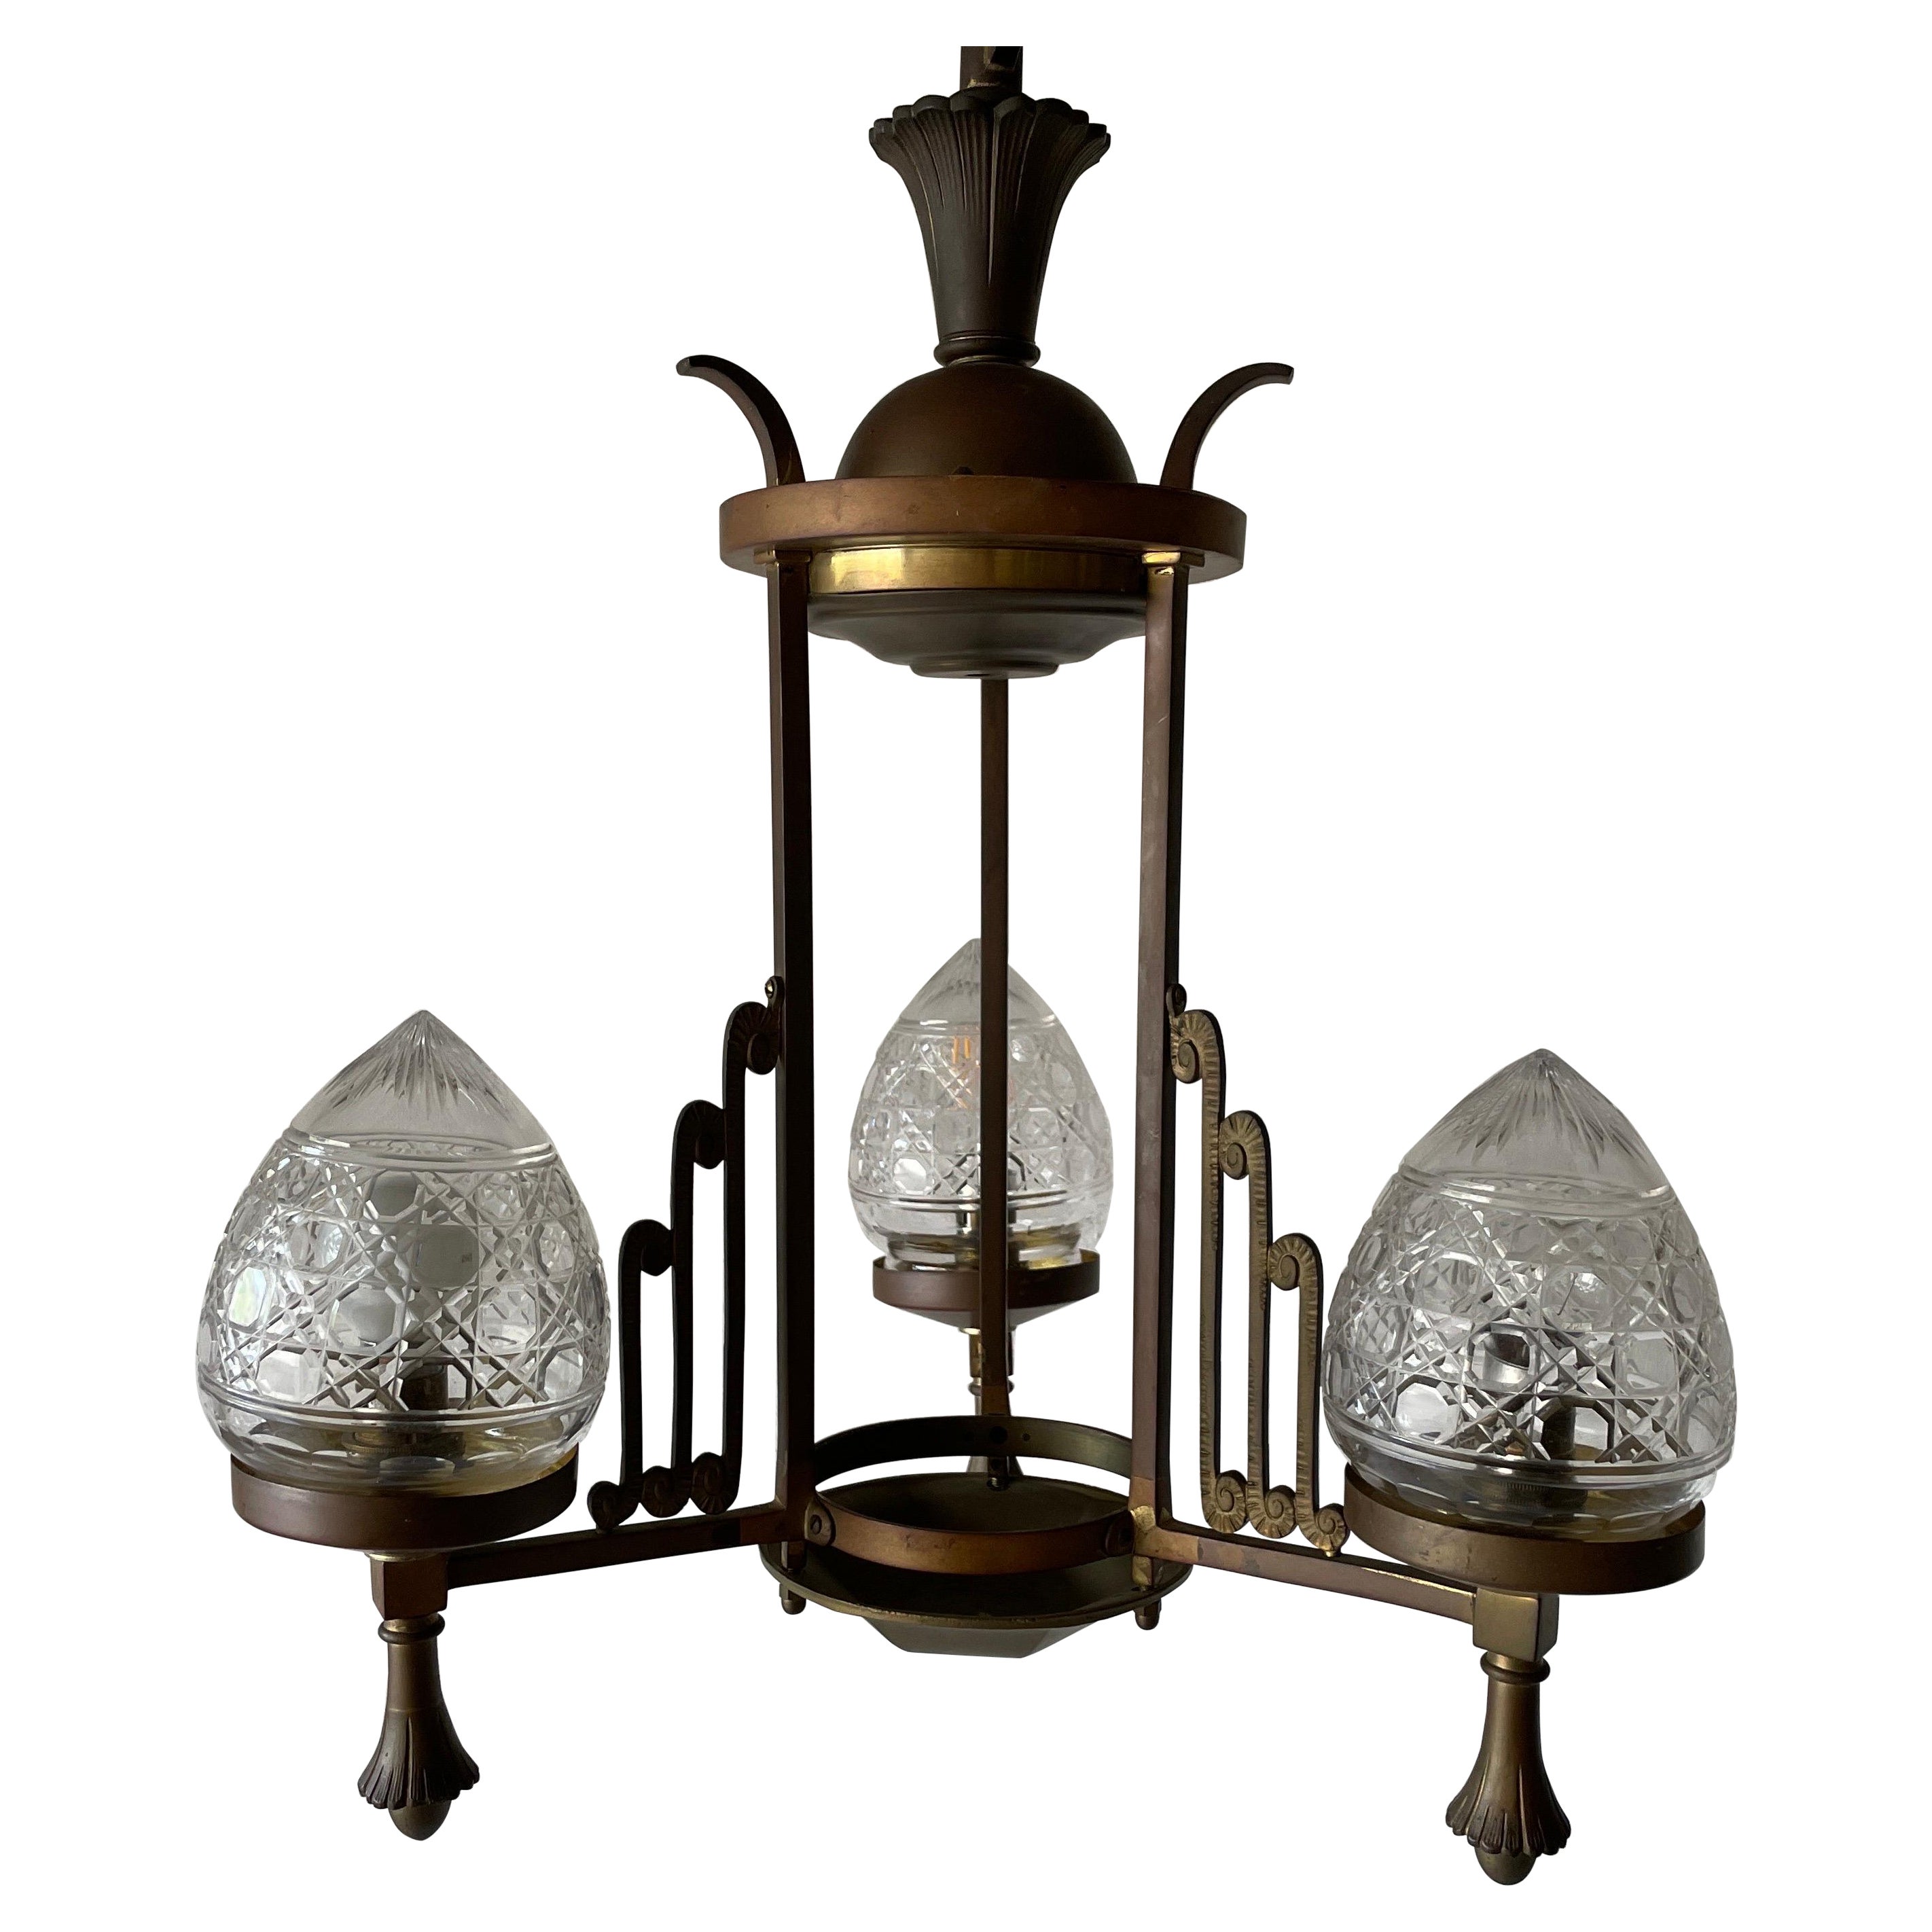 Unique French Copper Architectural Body Chandelier, 1940s, France For Sale